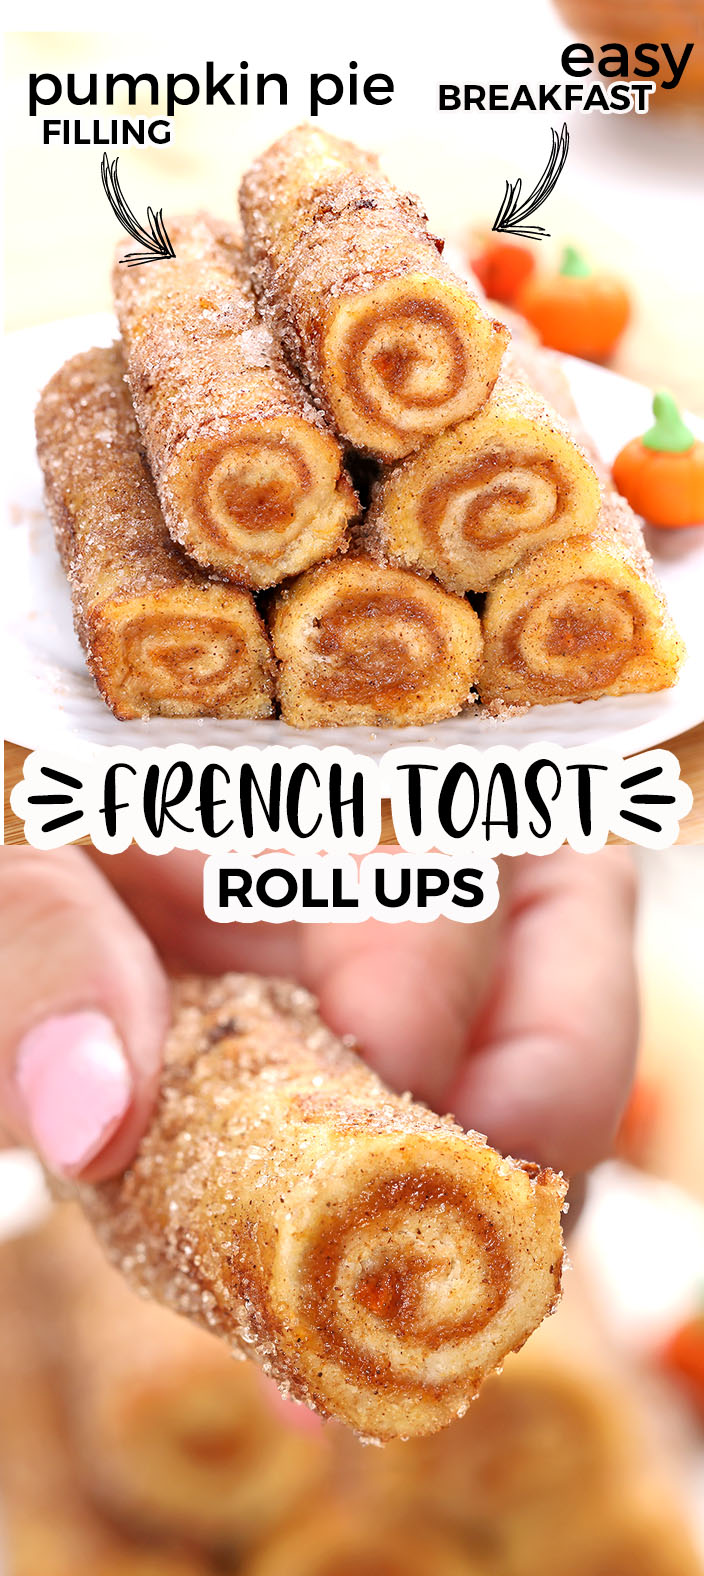 If you are in need of a pumpkin fix in your life, these Pumpkin Pie French Toast Roll-Ups will become a morning [and afternoon and evening] treat that the whole family will love!